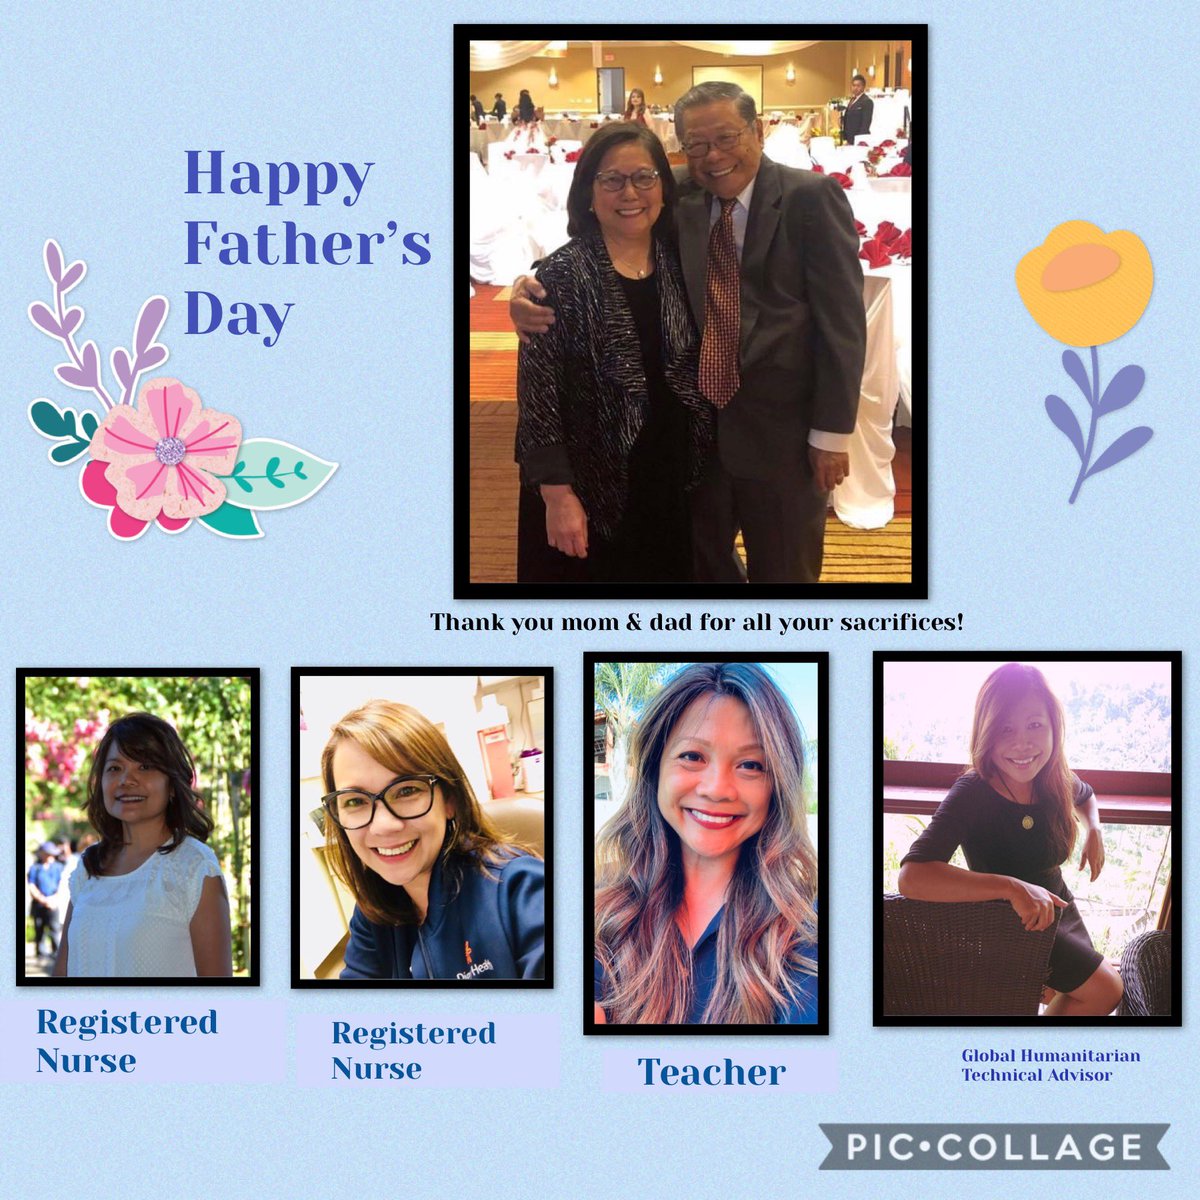 Our parents brought us to the U.S. when we were 16, 15, 13, & 6 years old. My dad worked 3 jobs! All my dad expected from us was to do well in school & someday finish college. Thank you dad for all your sacrifices & providing a better future for us! #immigrantchildren #hesdpride